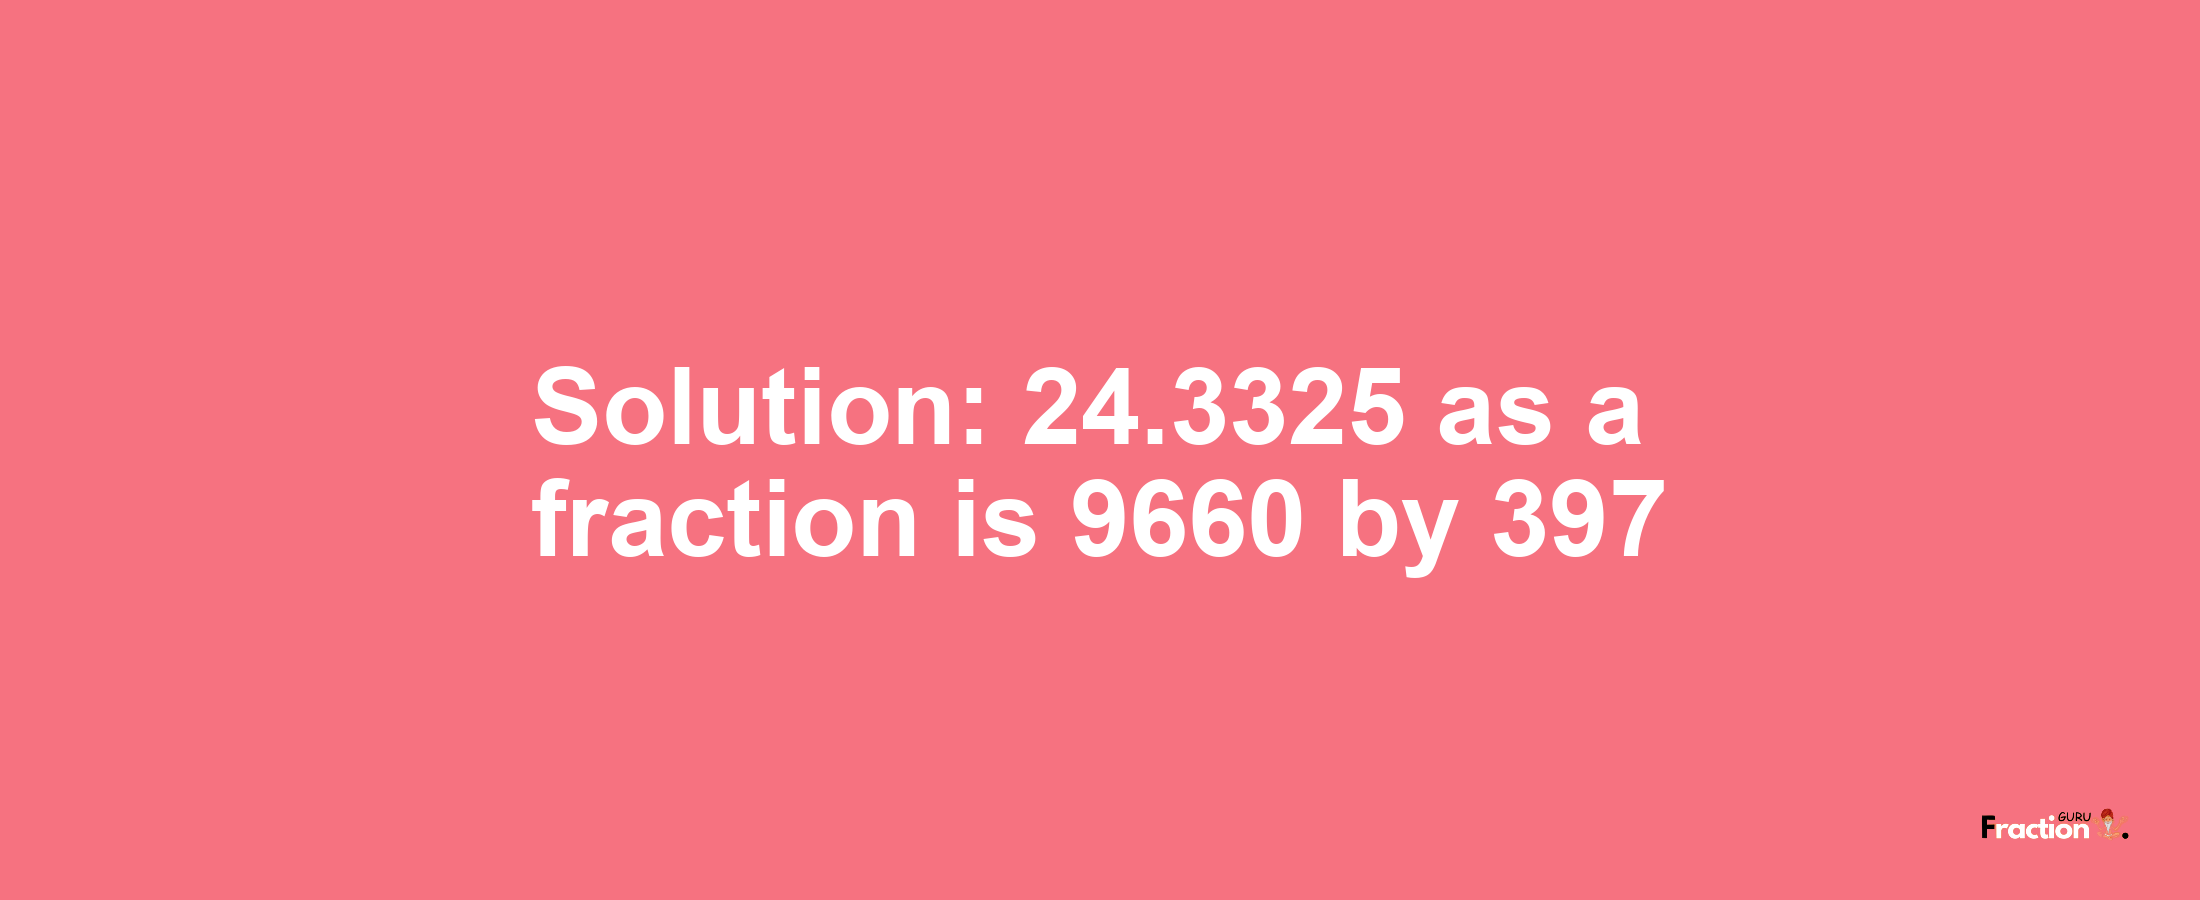 Solution:24.3325 as a fraction is 9660/397